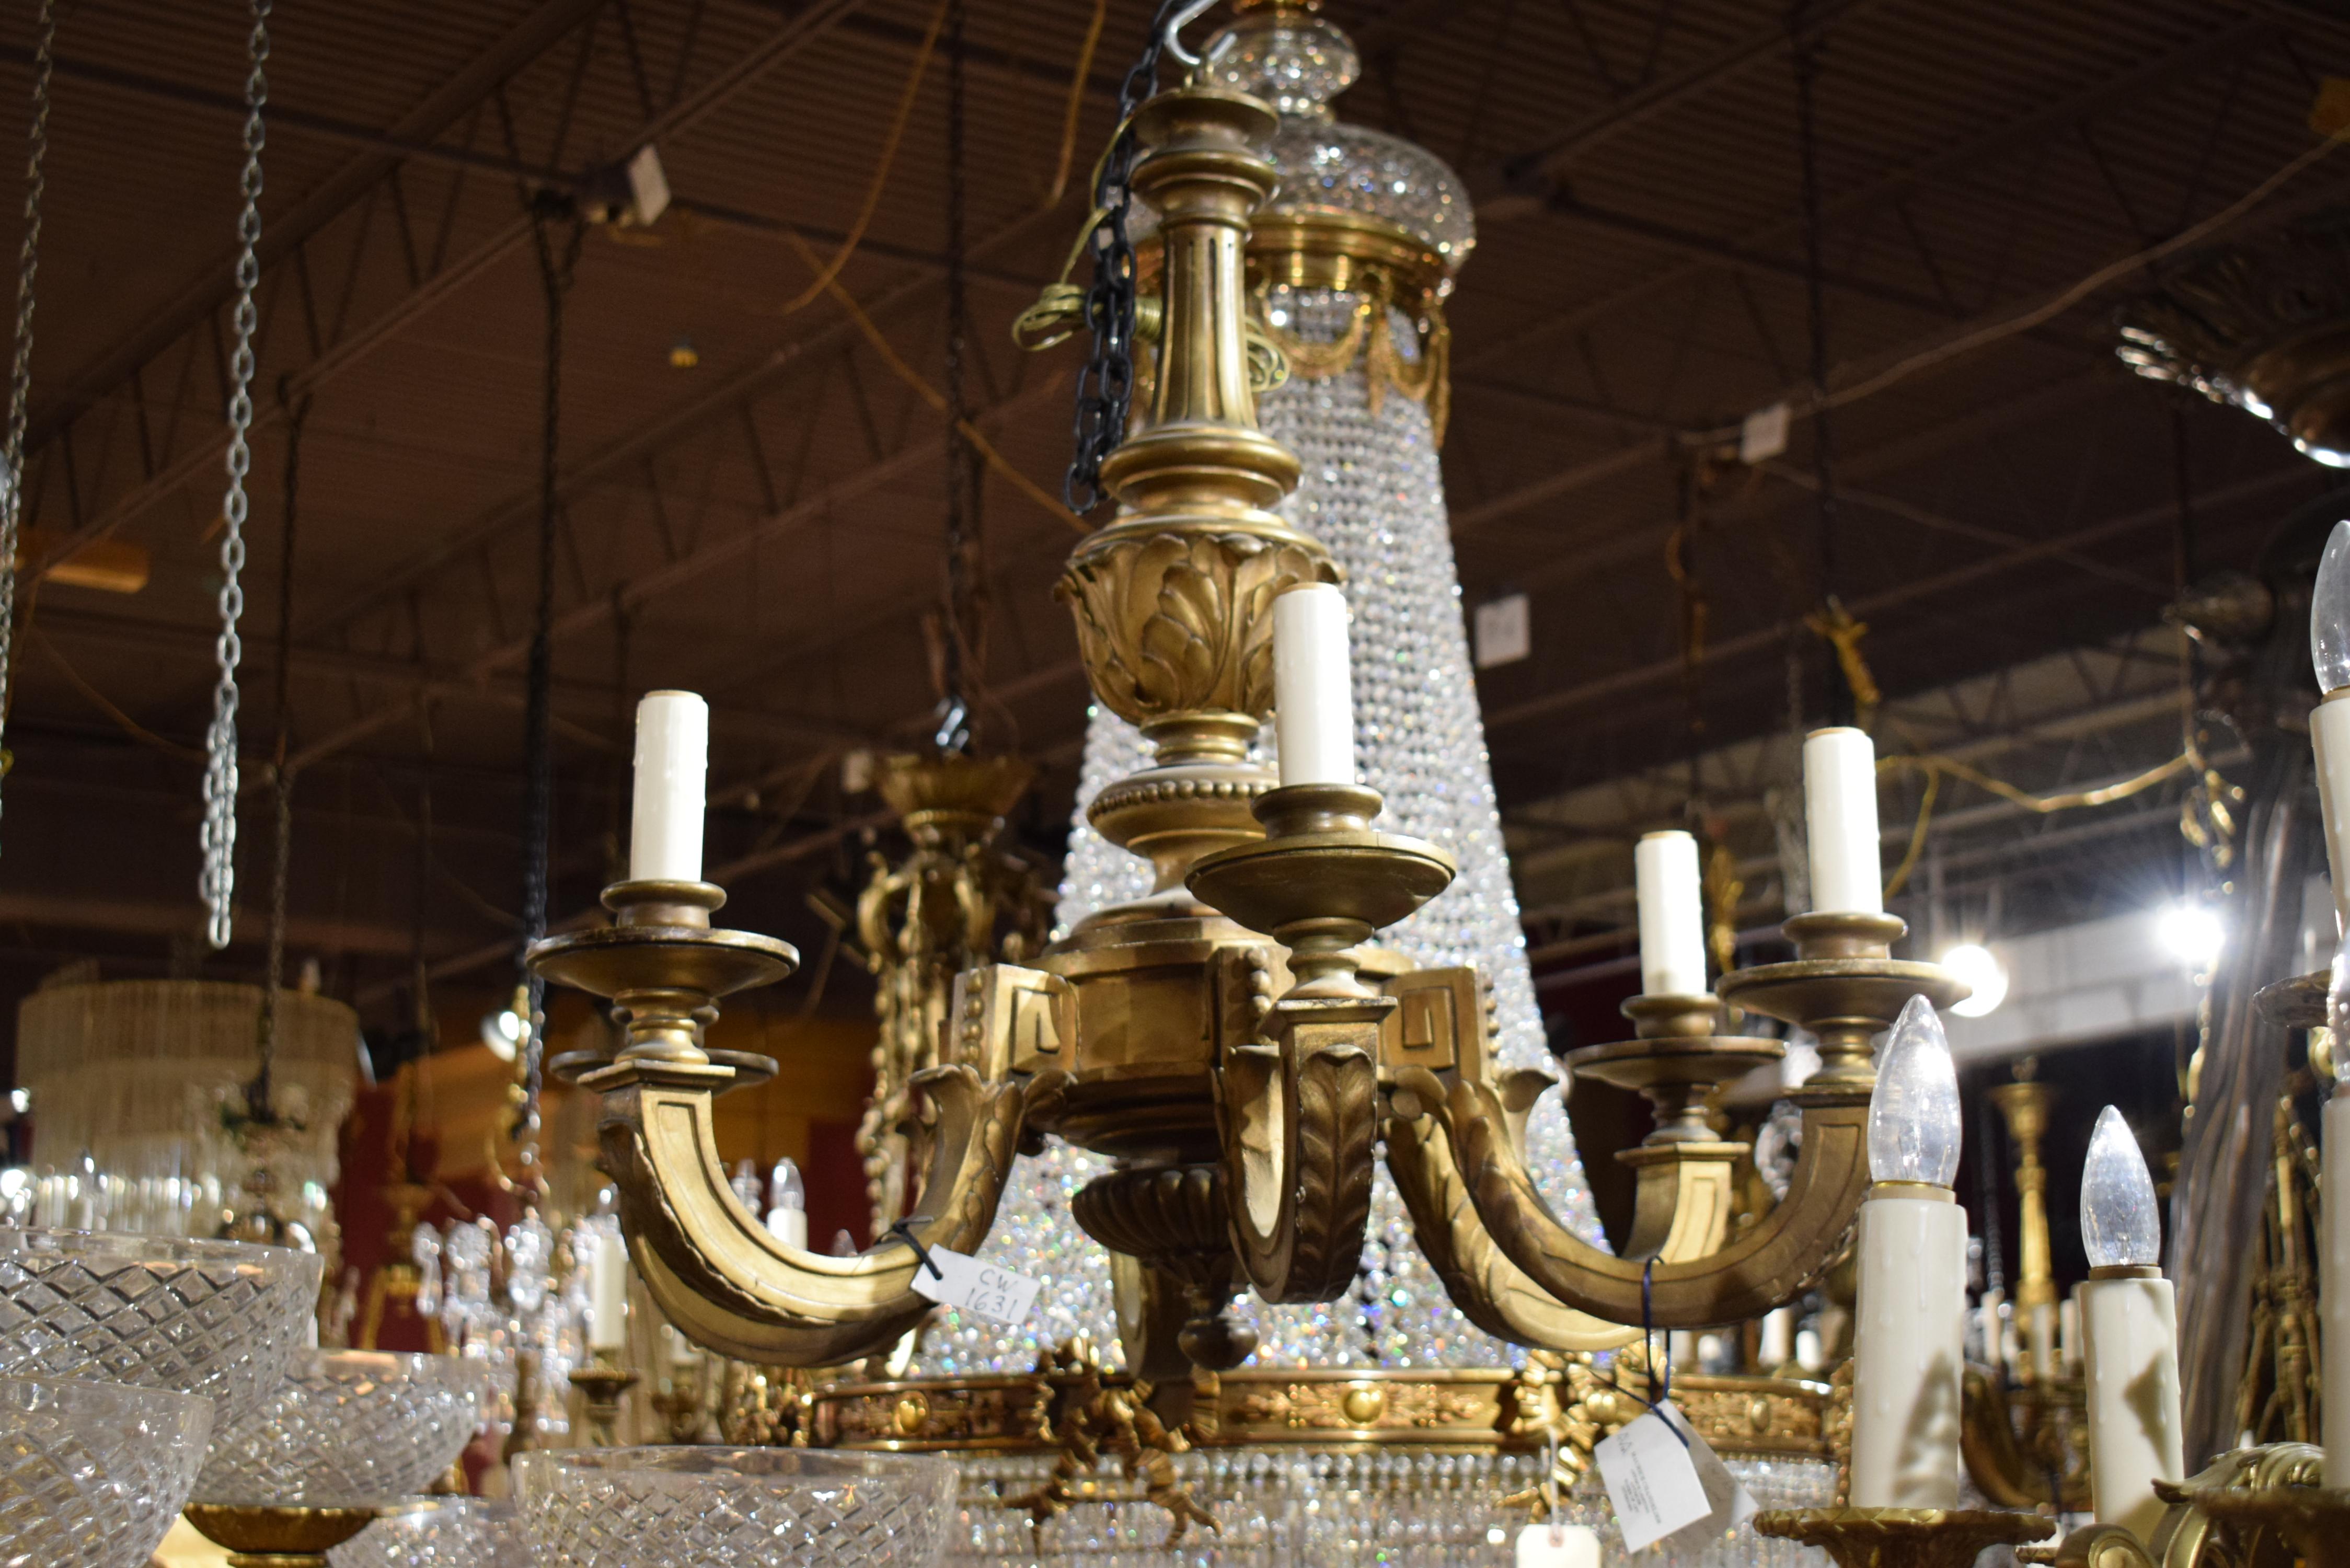 French Giltwood Chandelier